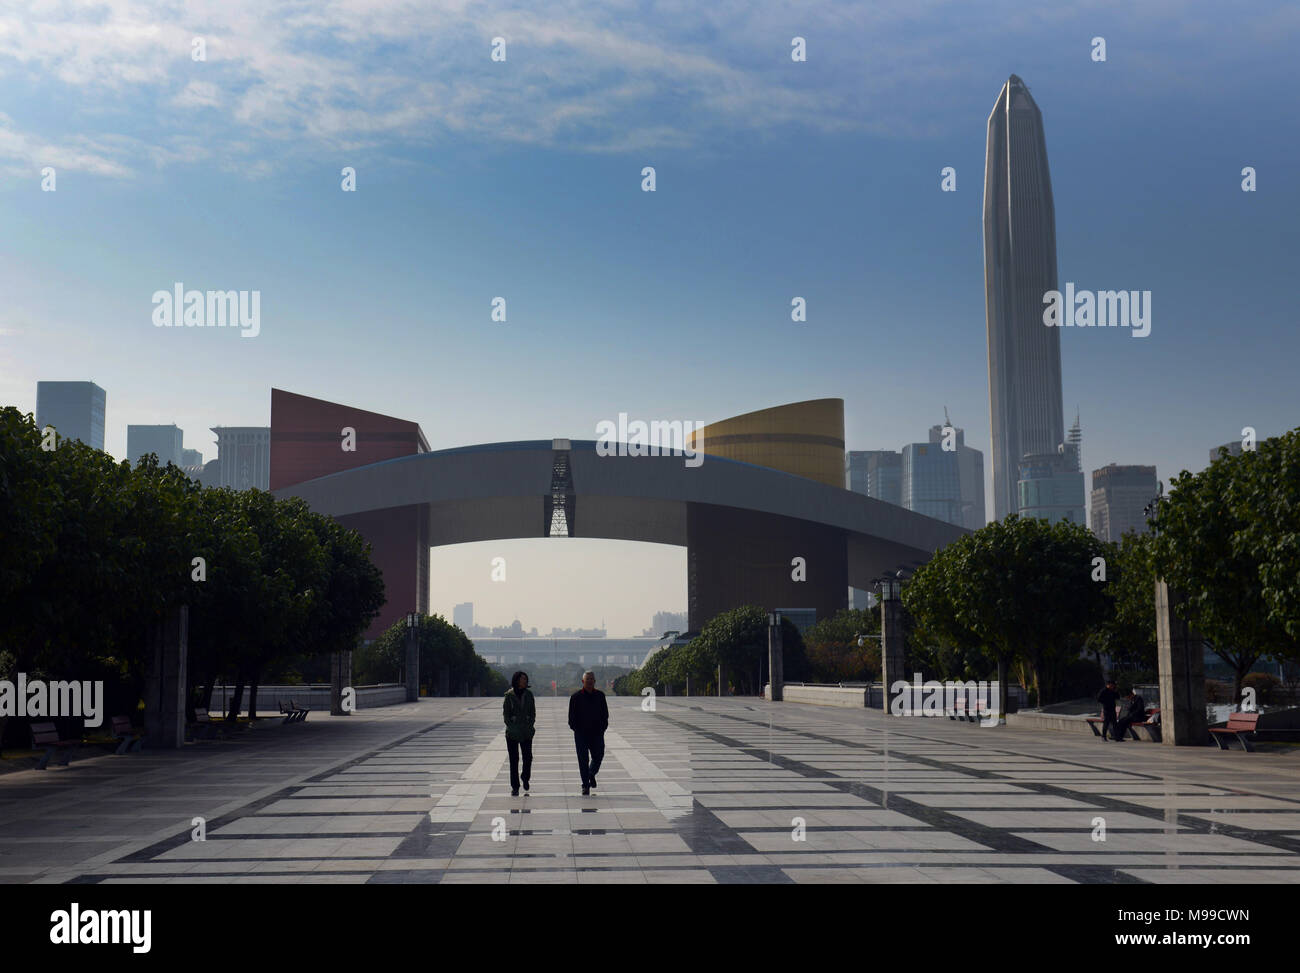 The Shenzhen Civic center in Futian's central business district. Stock Photo